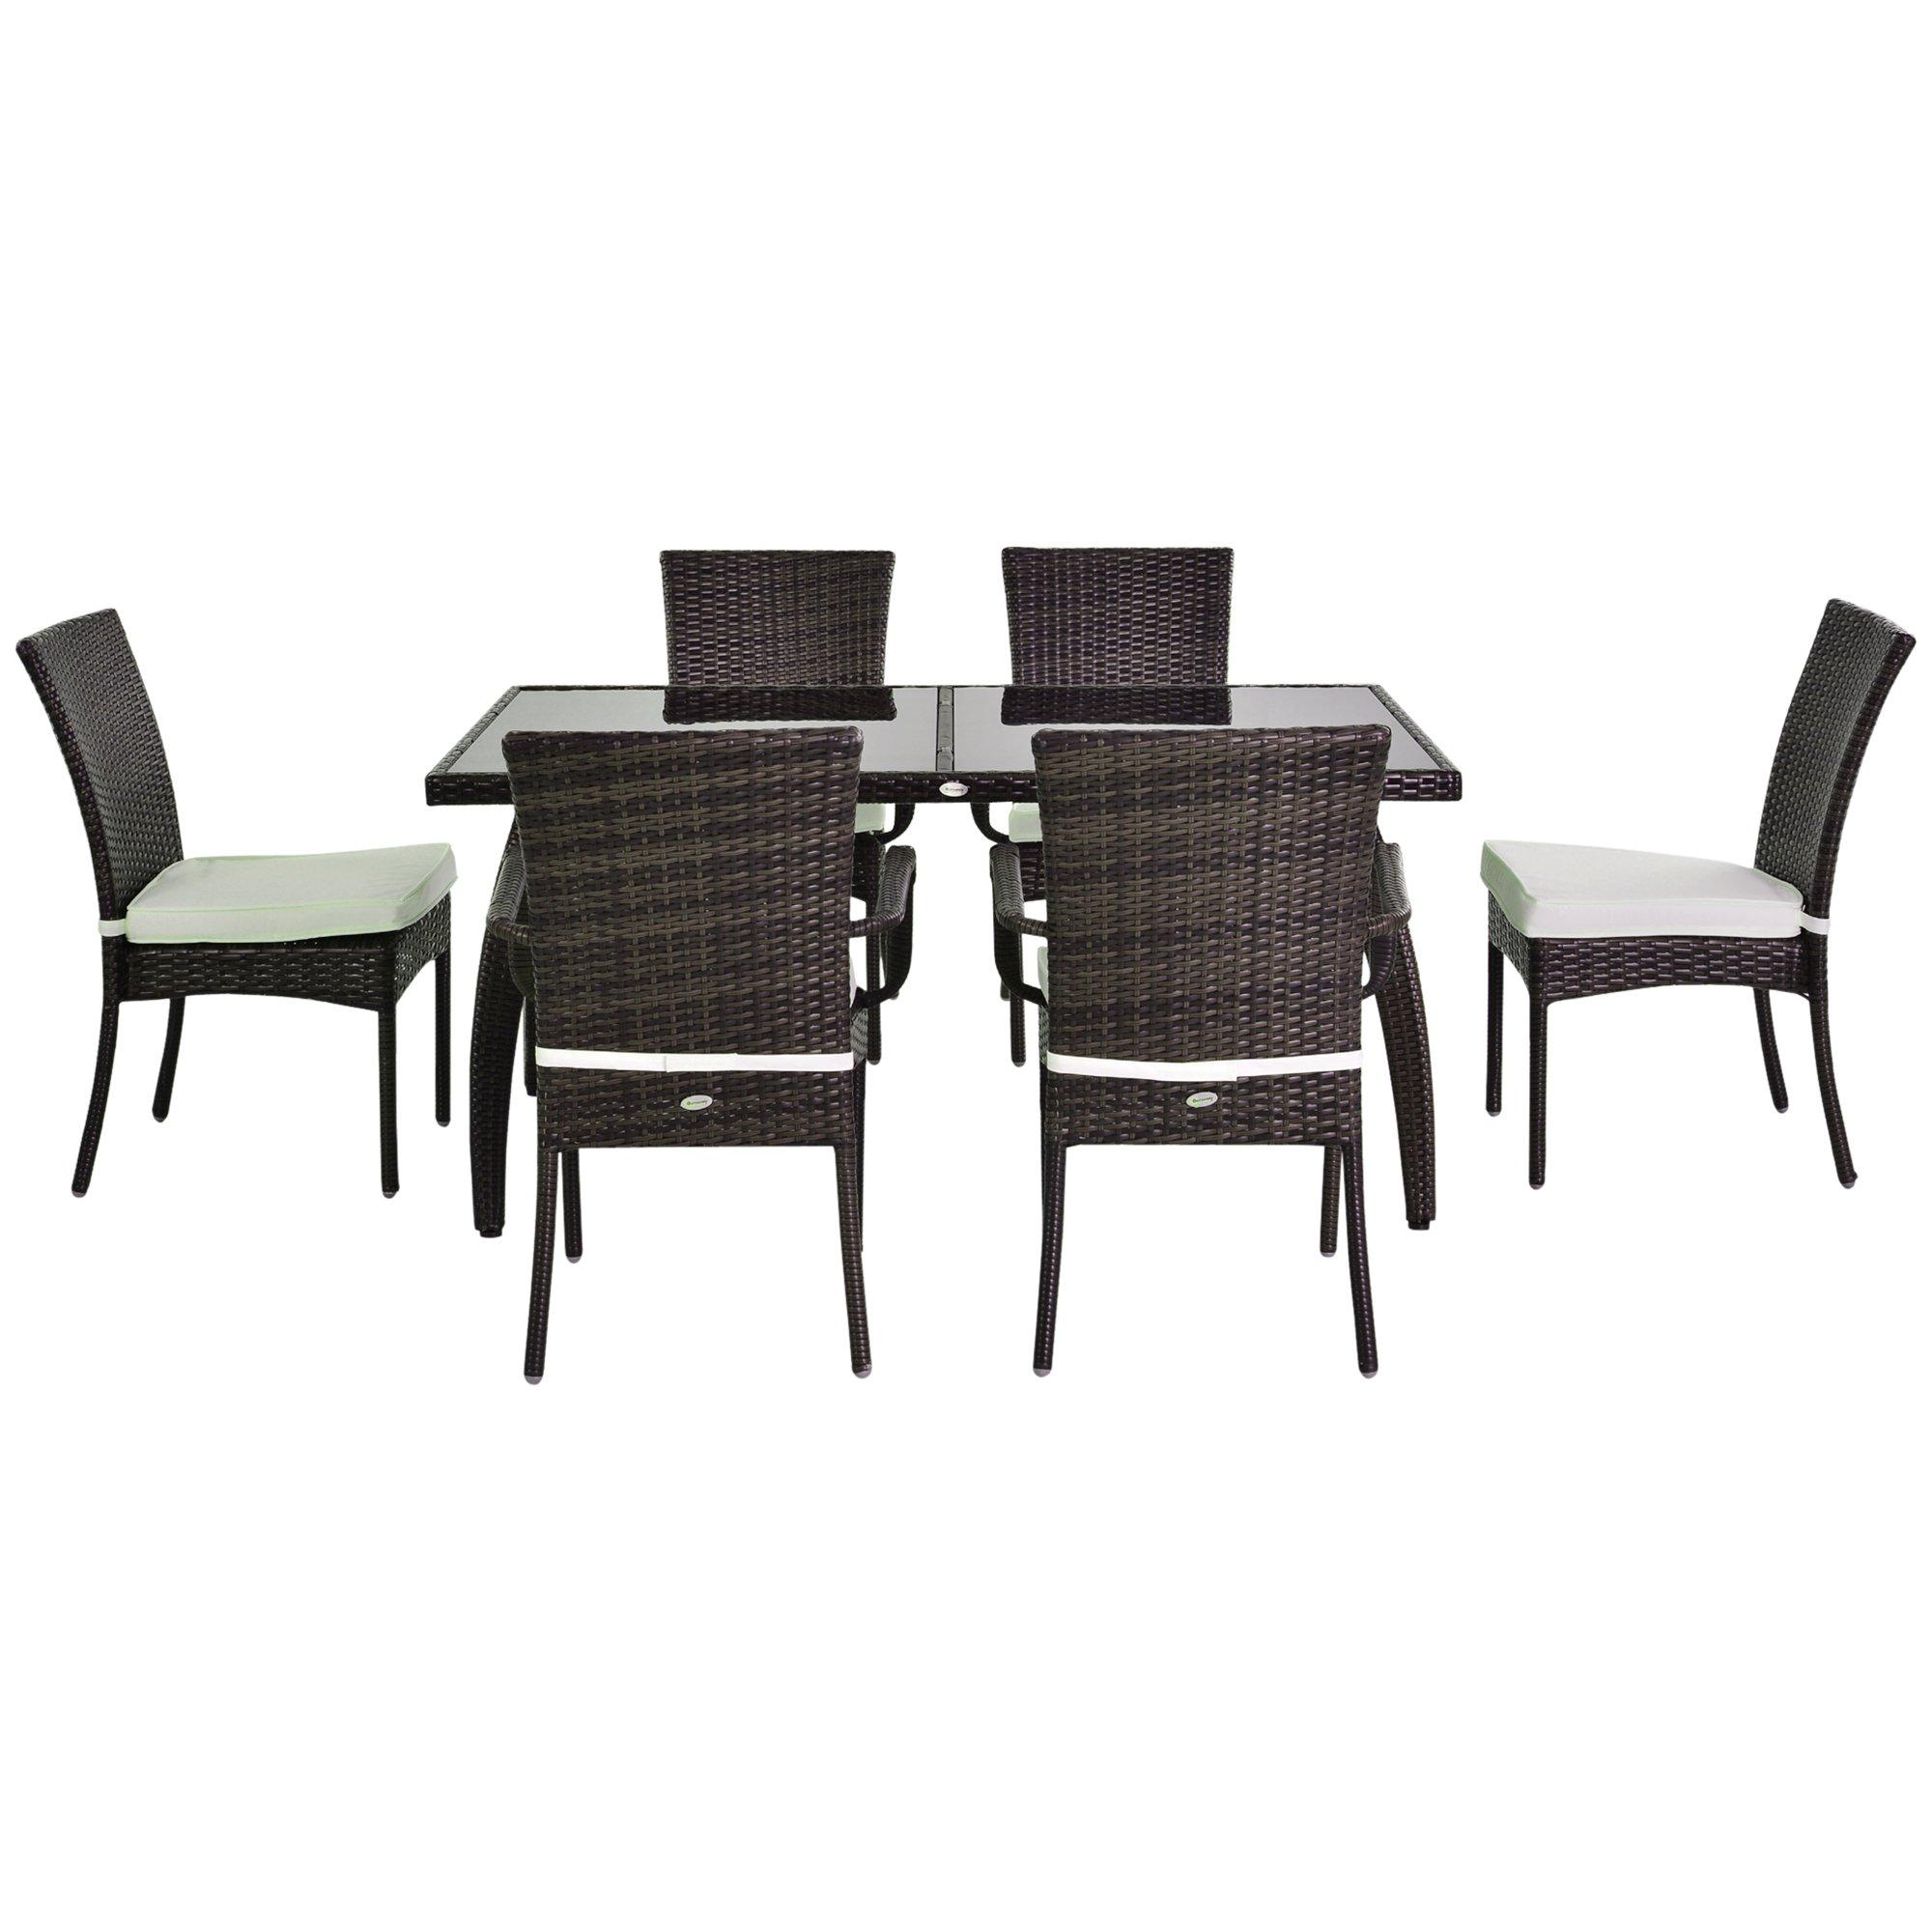 7 Pieces Rattan Dining Set Furniture Garden Tempered Table Cushion Wicker